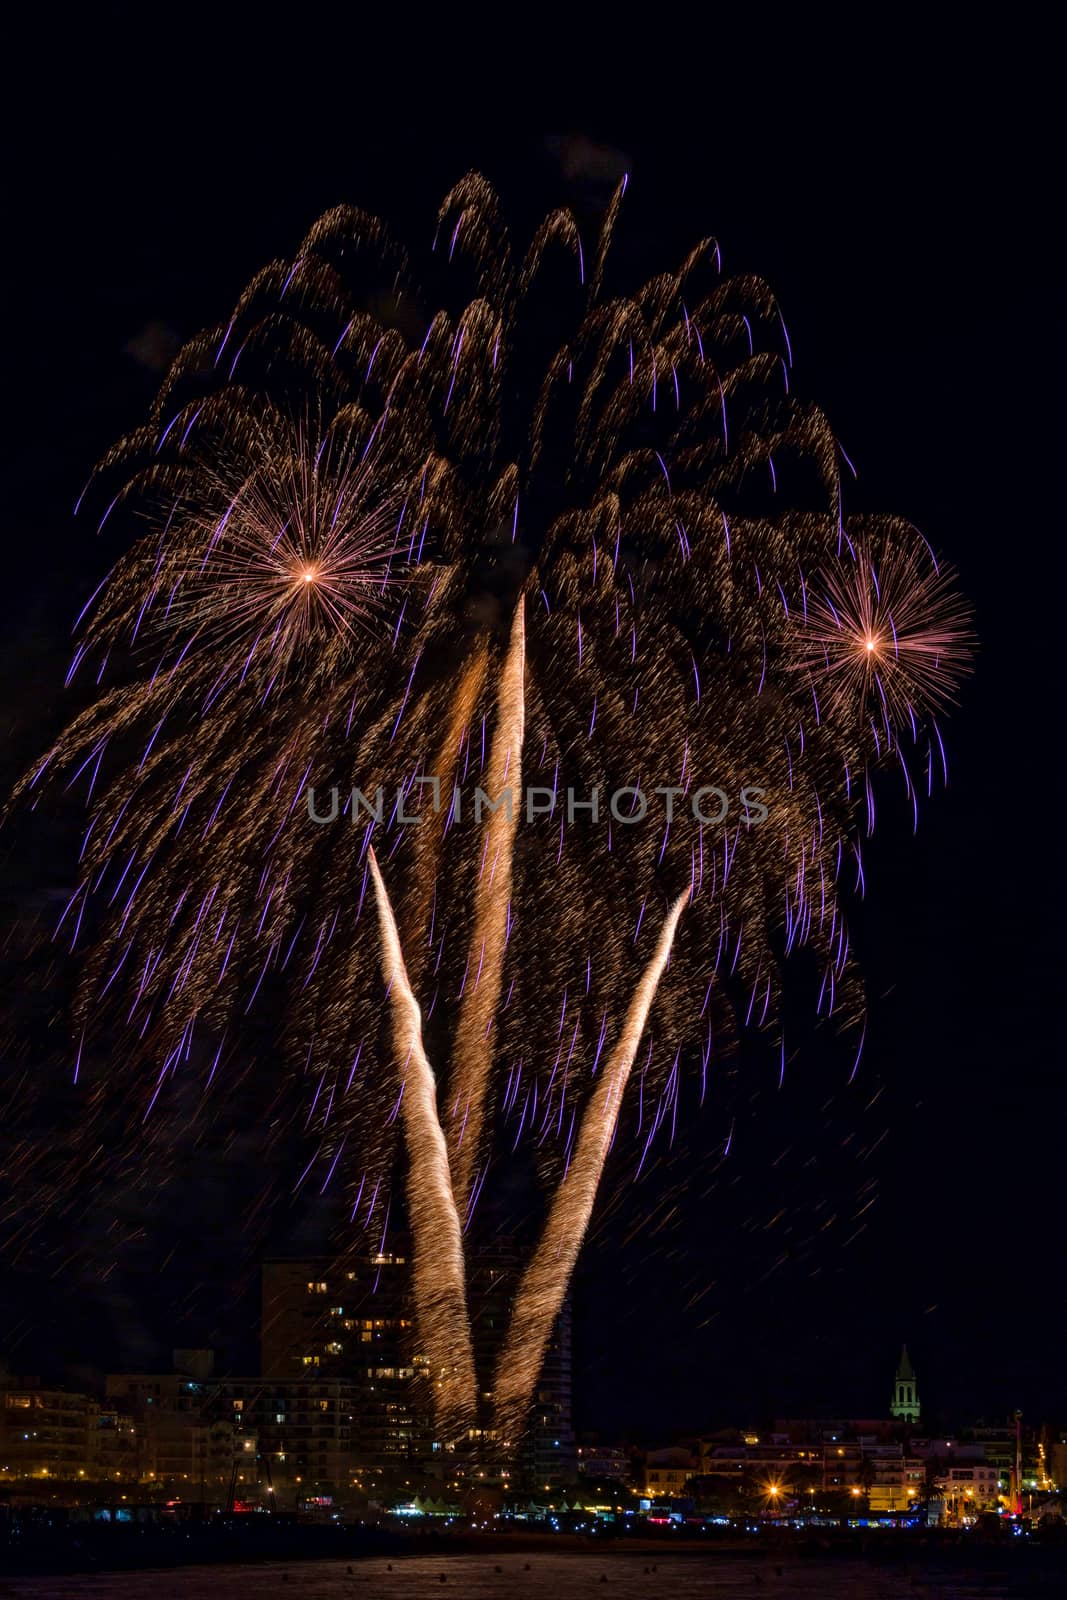 Interesting fireworks over the small town in Spain, Palamos by Digoarpi